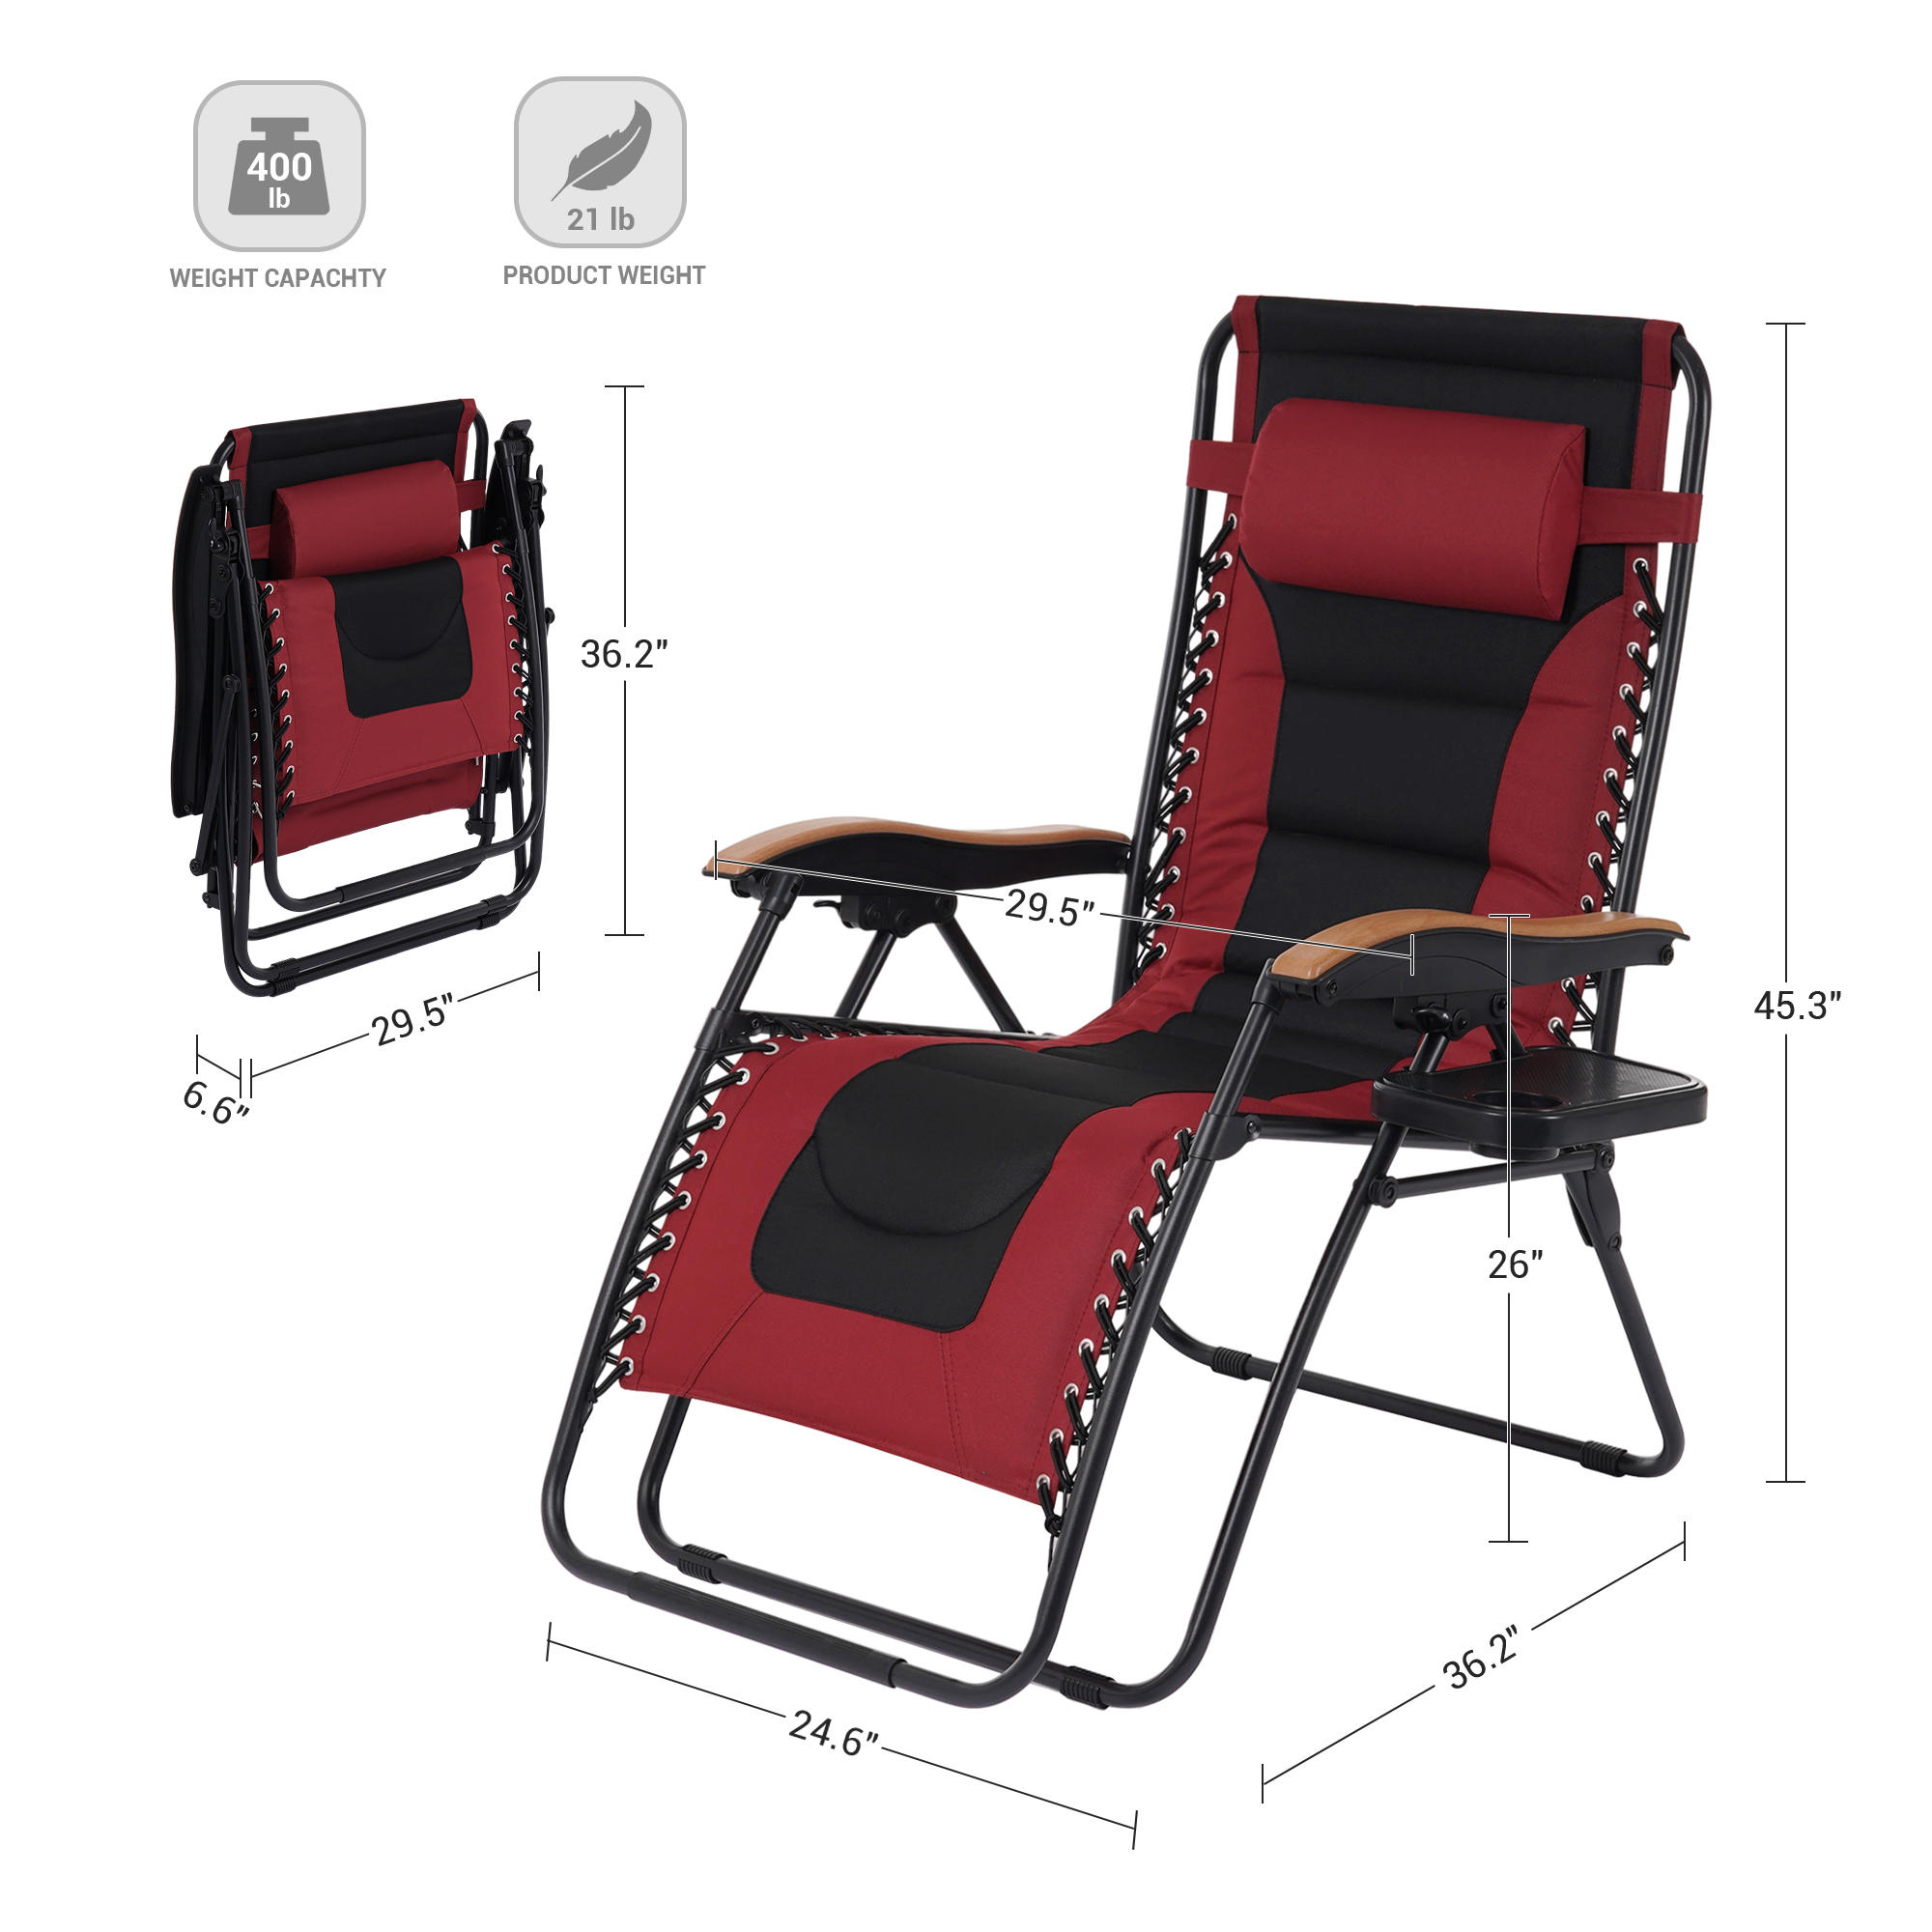 Sonerlic 1Pcs Outdoor Patio Adjustable Padded Zero Gravity Chair with a Side Tray for Patio, Deck, Poolside and Garden,Red - image 5 of 9